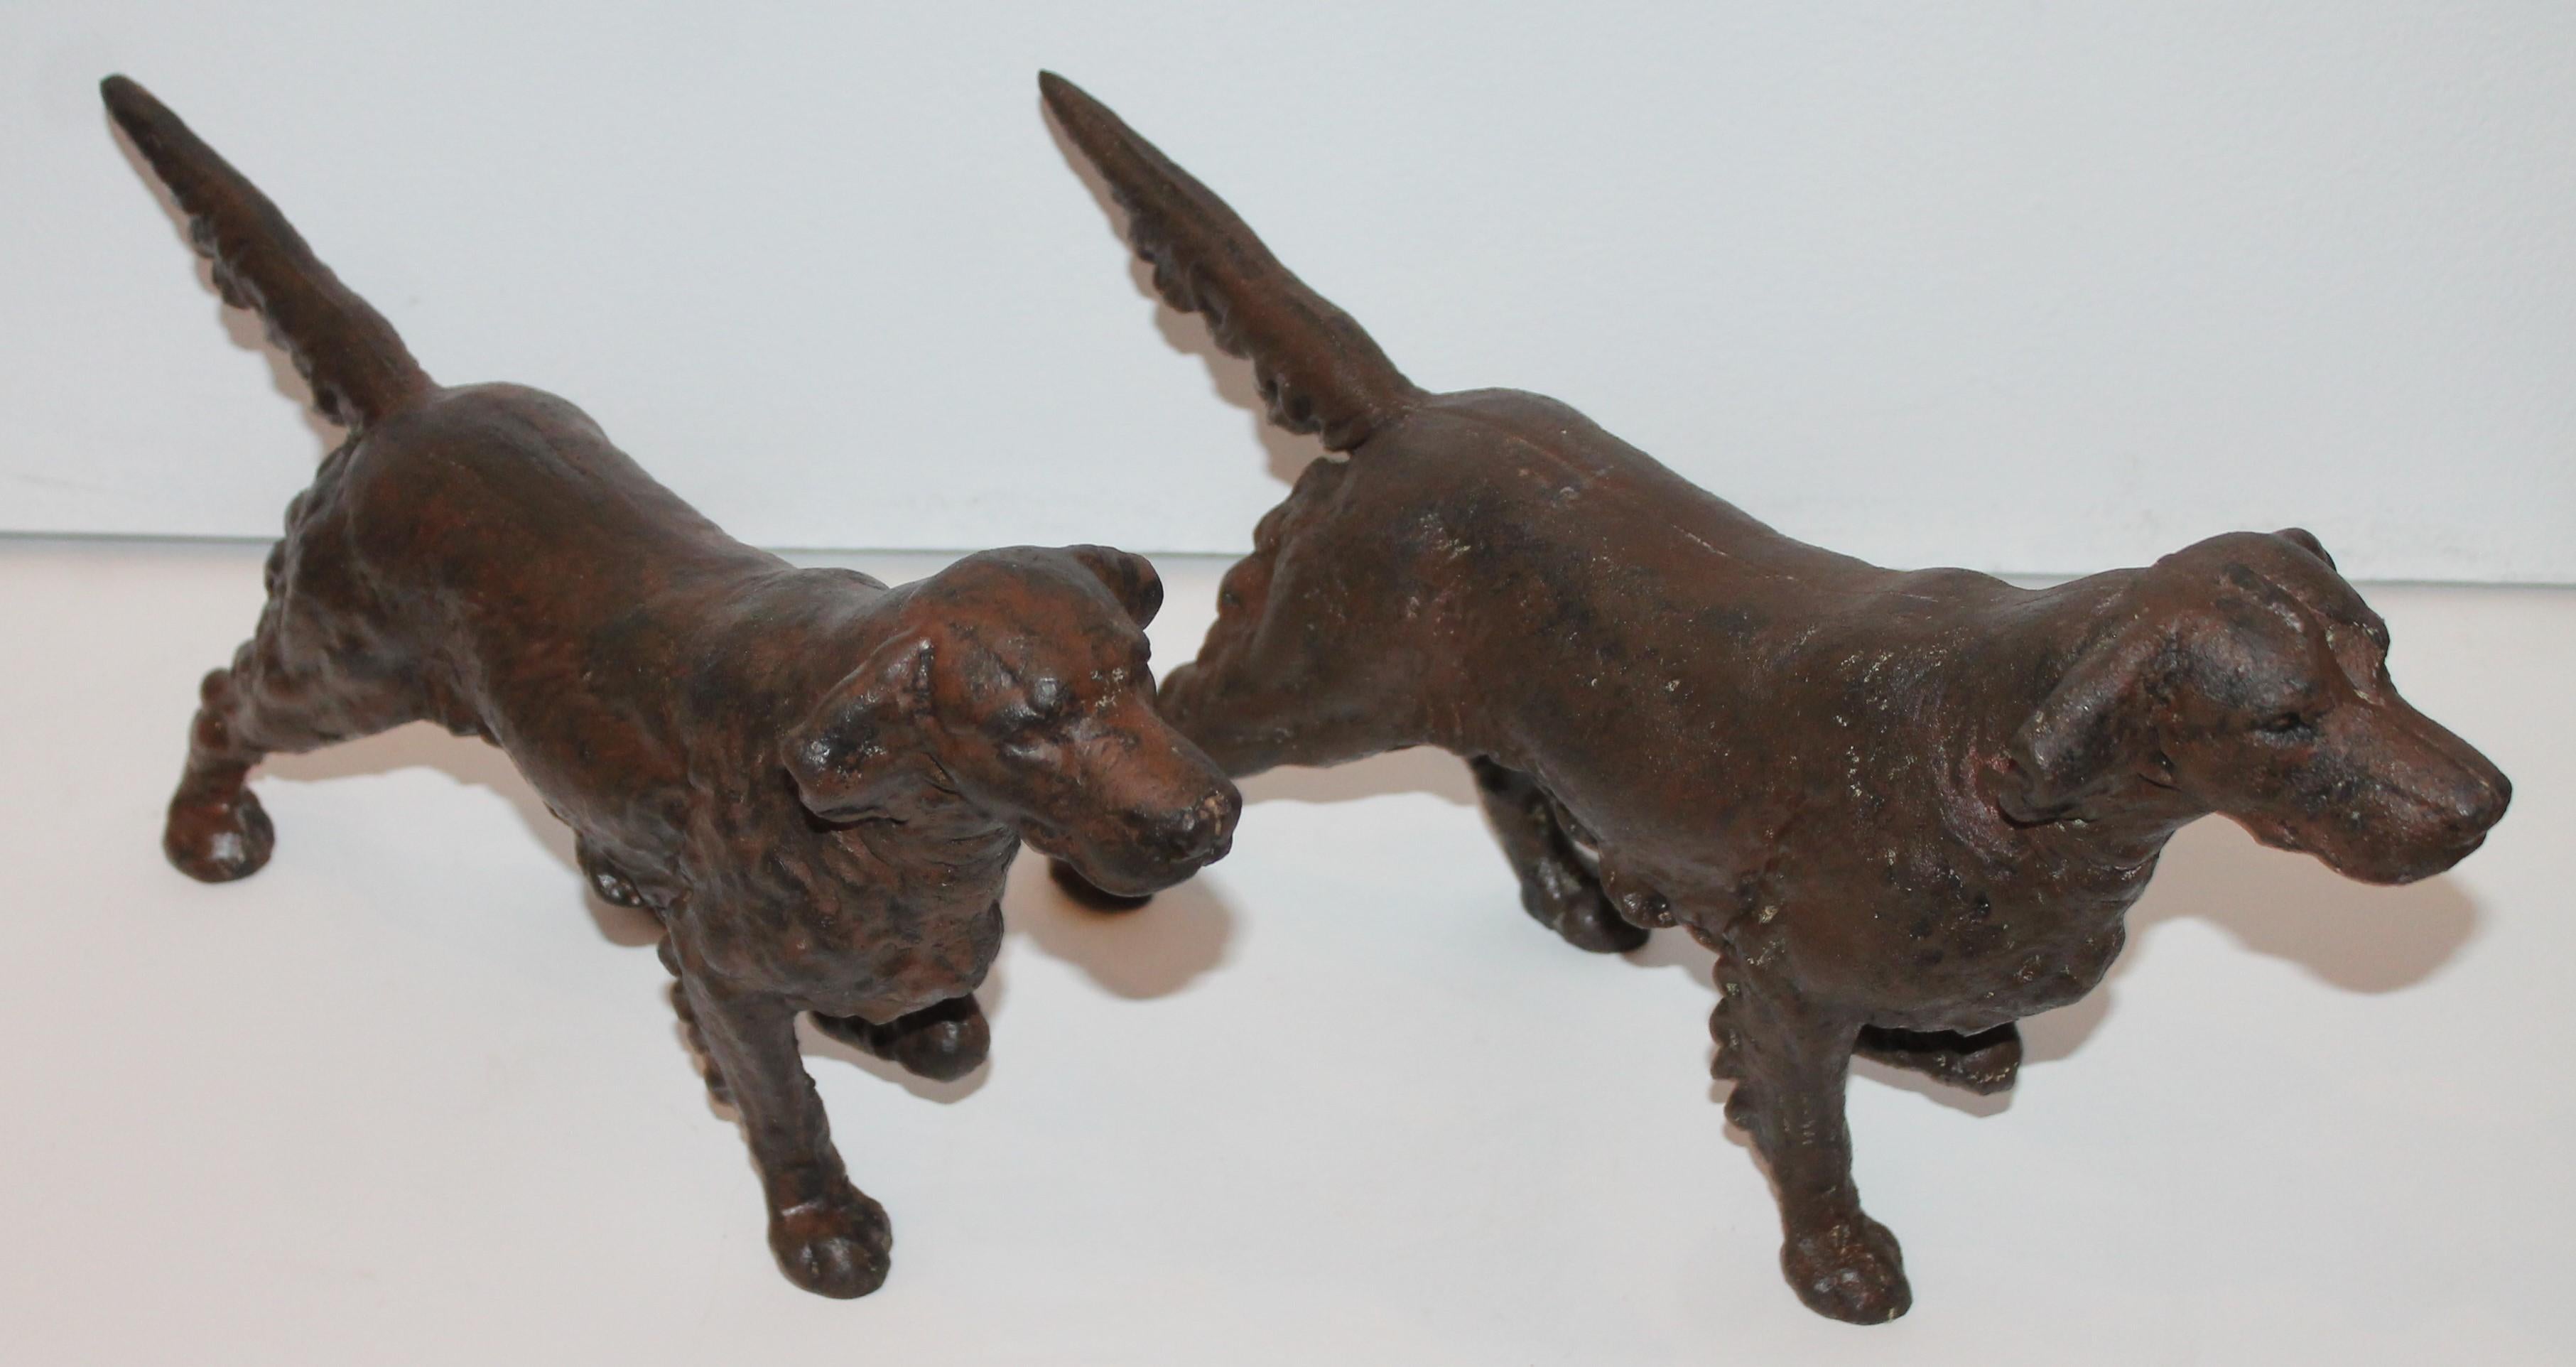 This pair of cast iron dog doorstops in the original worn surface. These dogs were unpainted as many are with old paint or re-painted surfaces. They are in the natural iron patina.